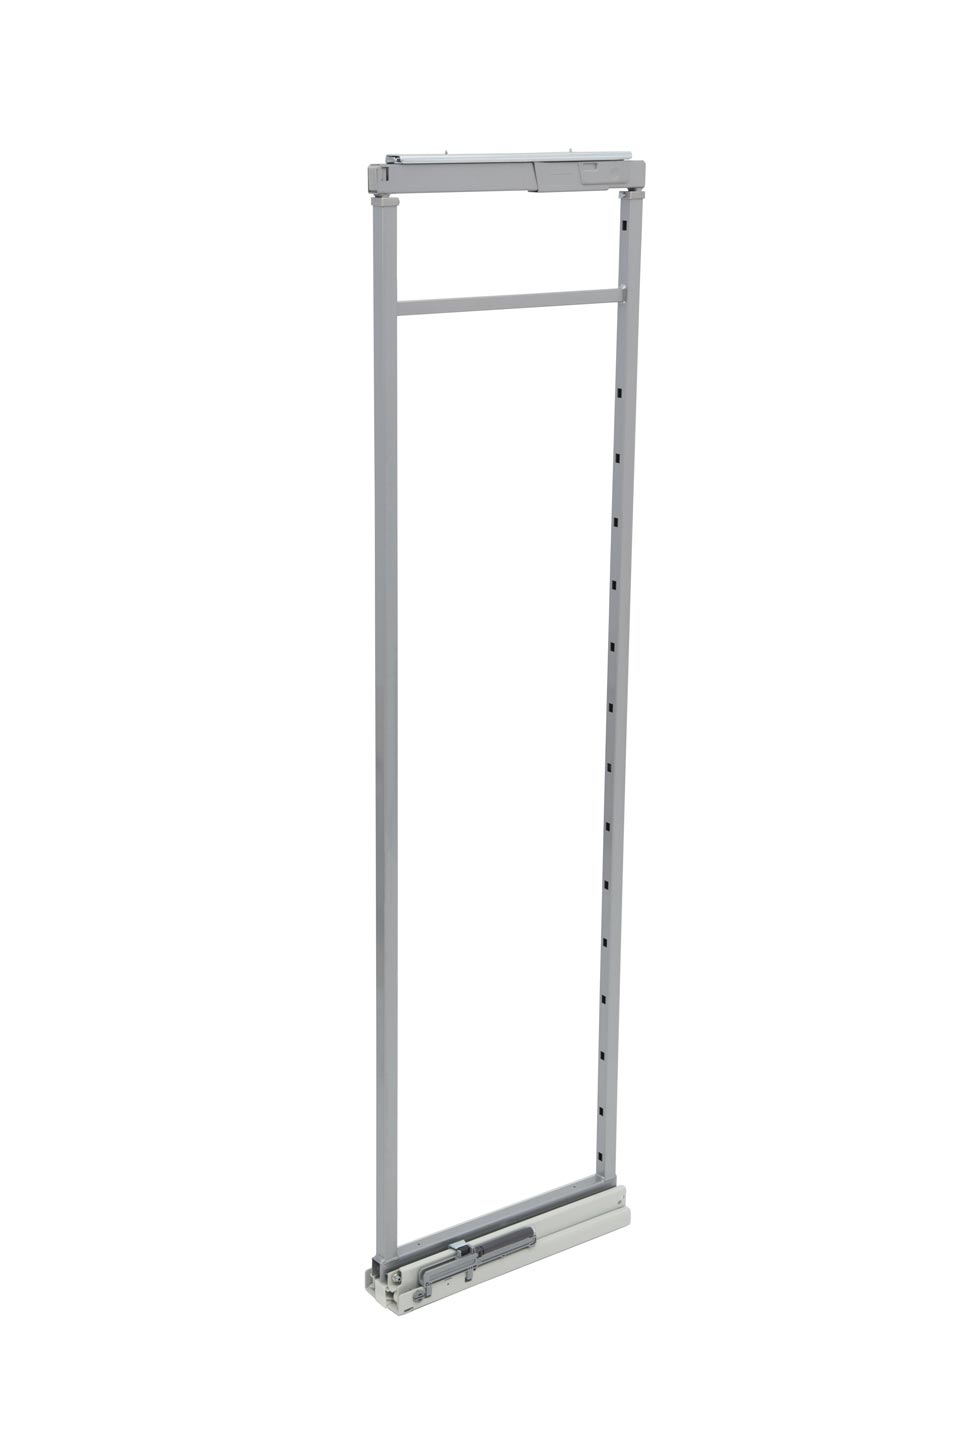 Pantry Pull Out Frame and Slide, Light Grey